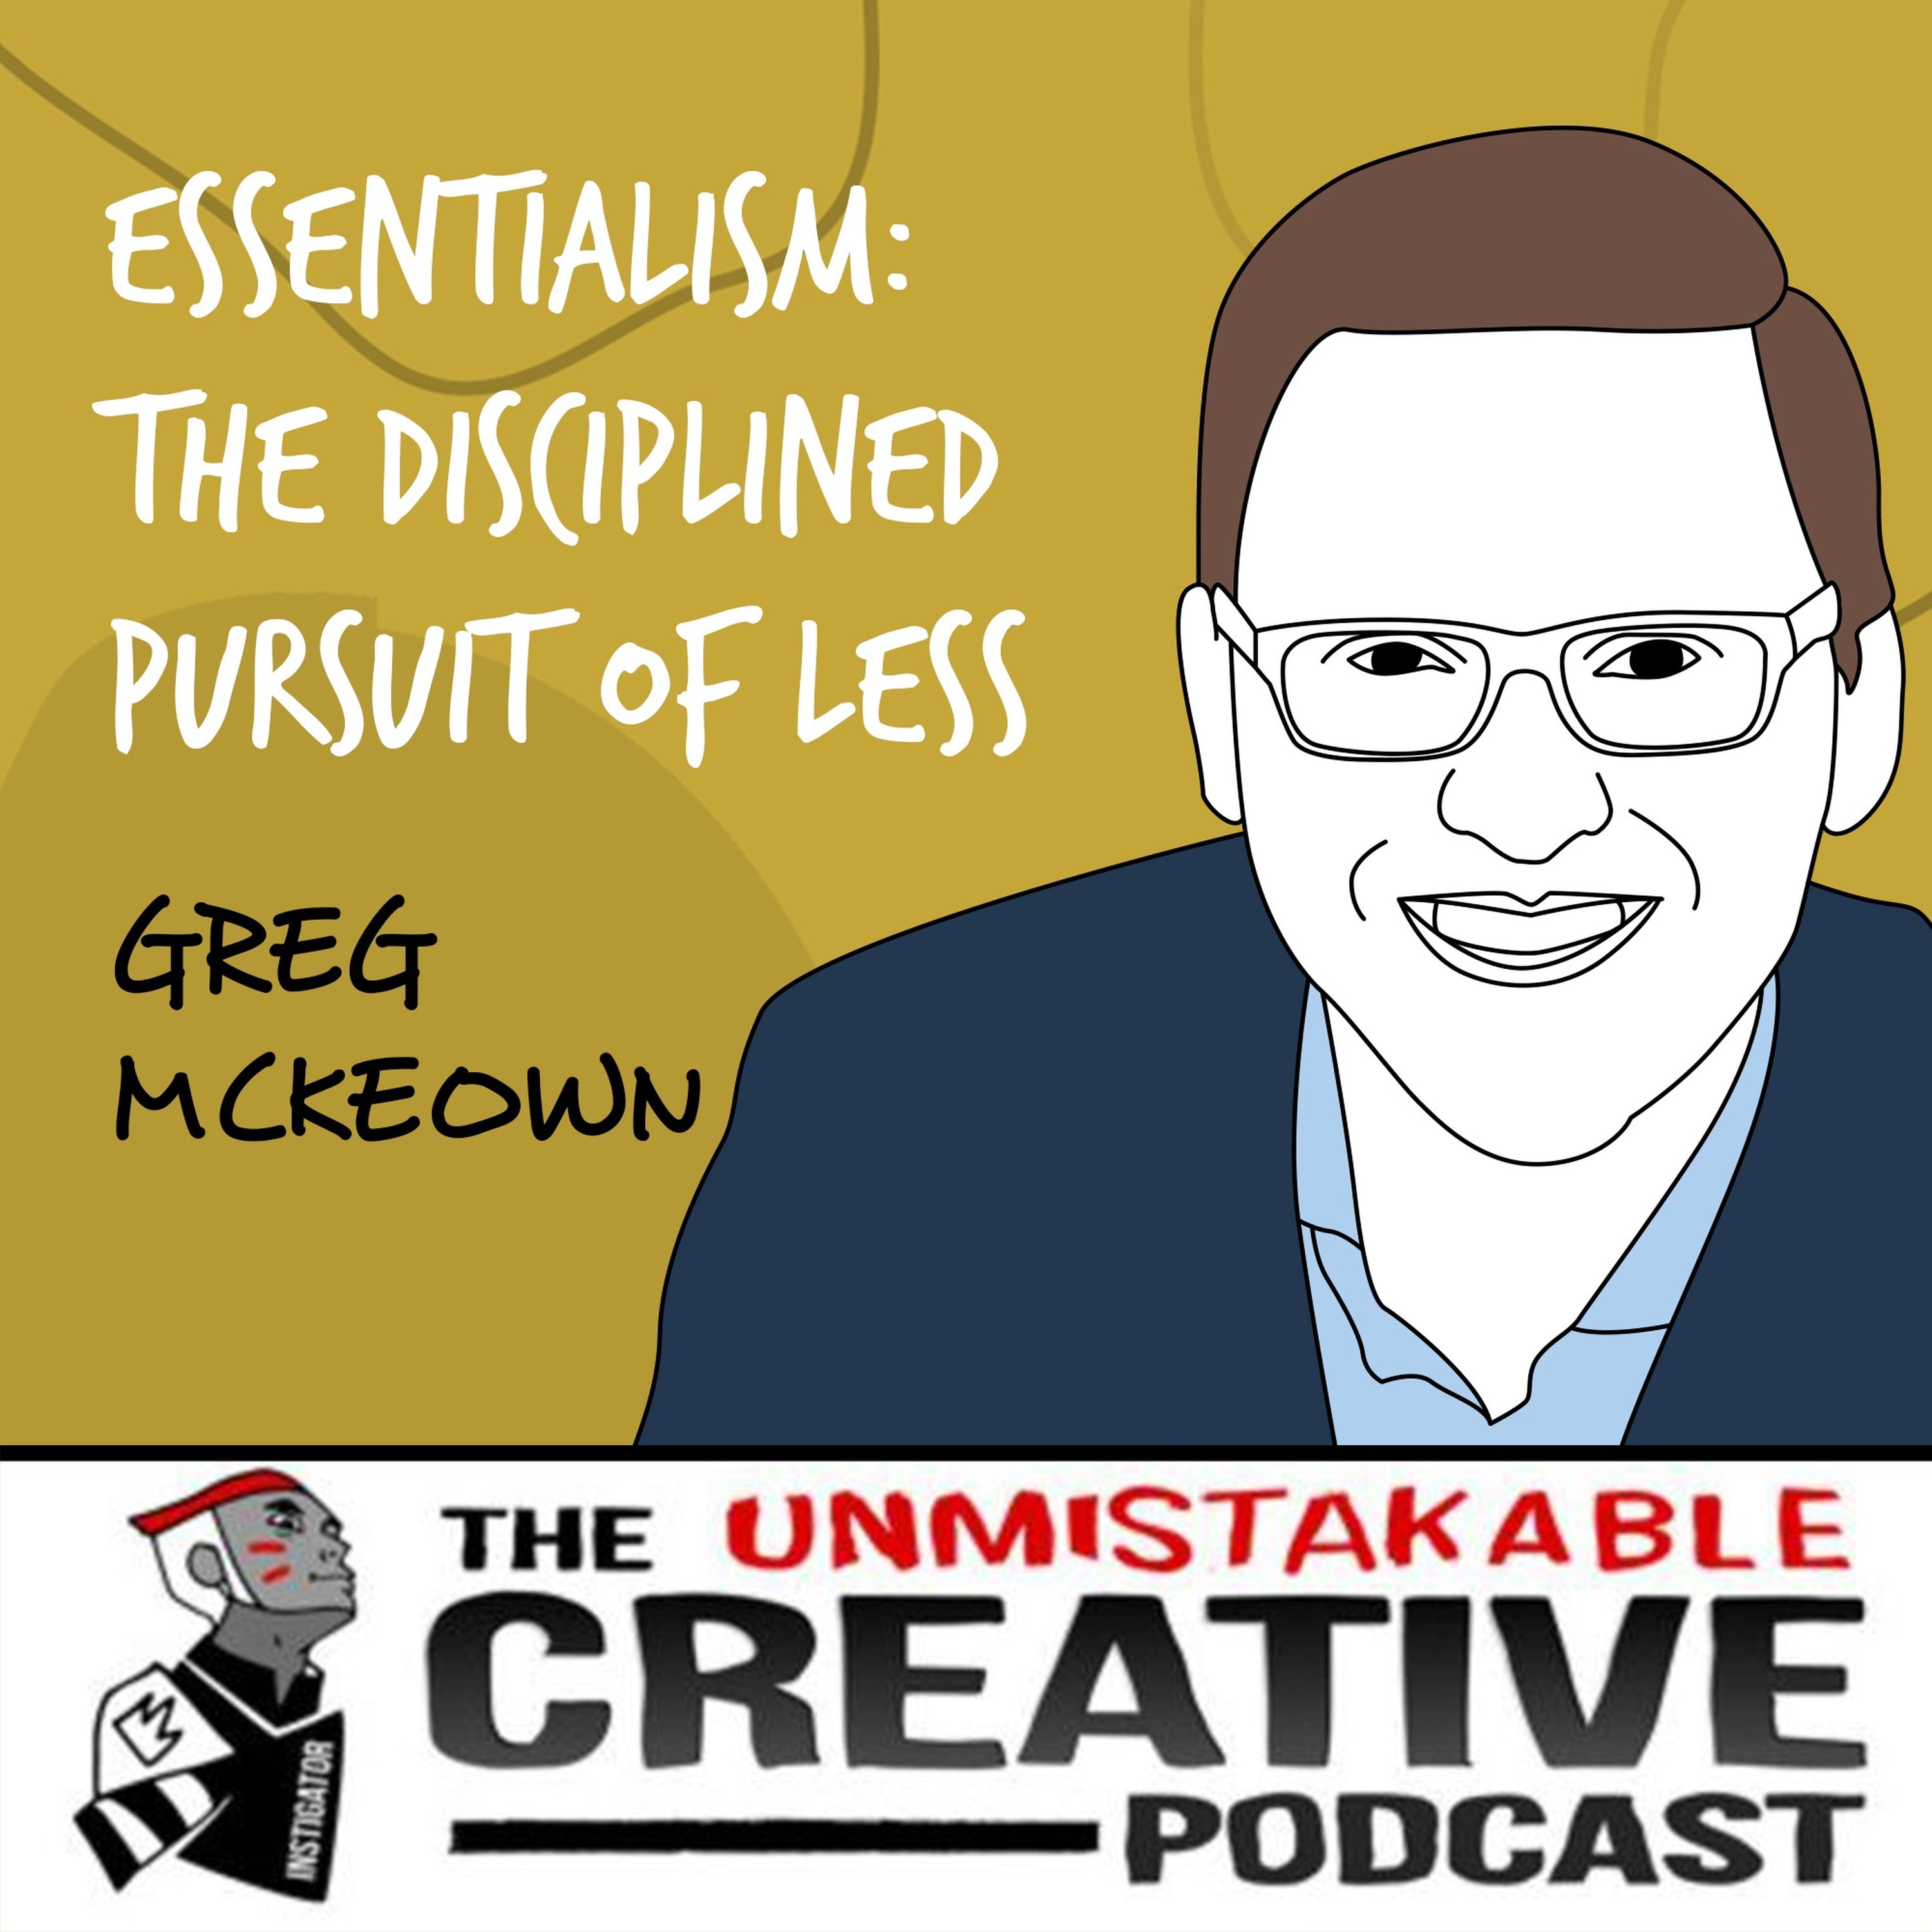 Best of 2020: Greg McKeown | Essentialism: The Disciplined Pursuit of Less Image